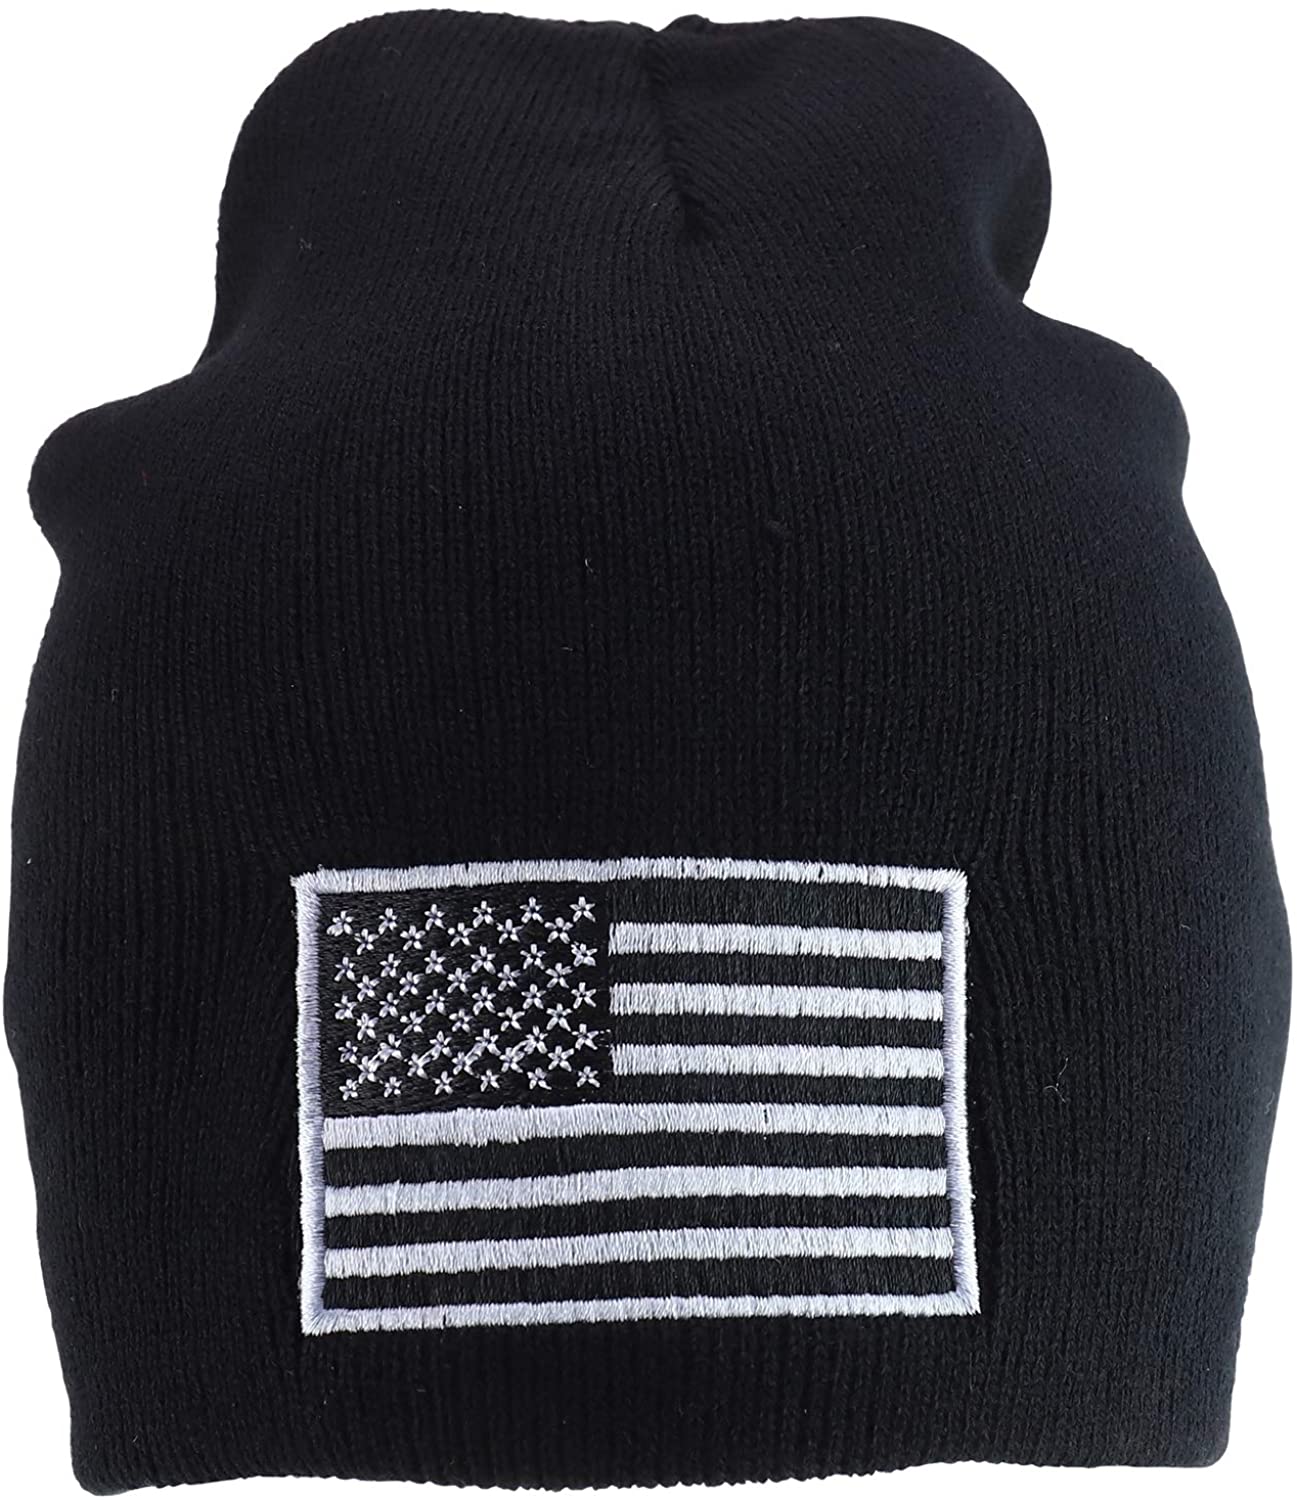 Rapid Dominance USA Subdued Grey American Flag Embroidered Short Beanie Hat